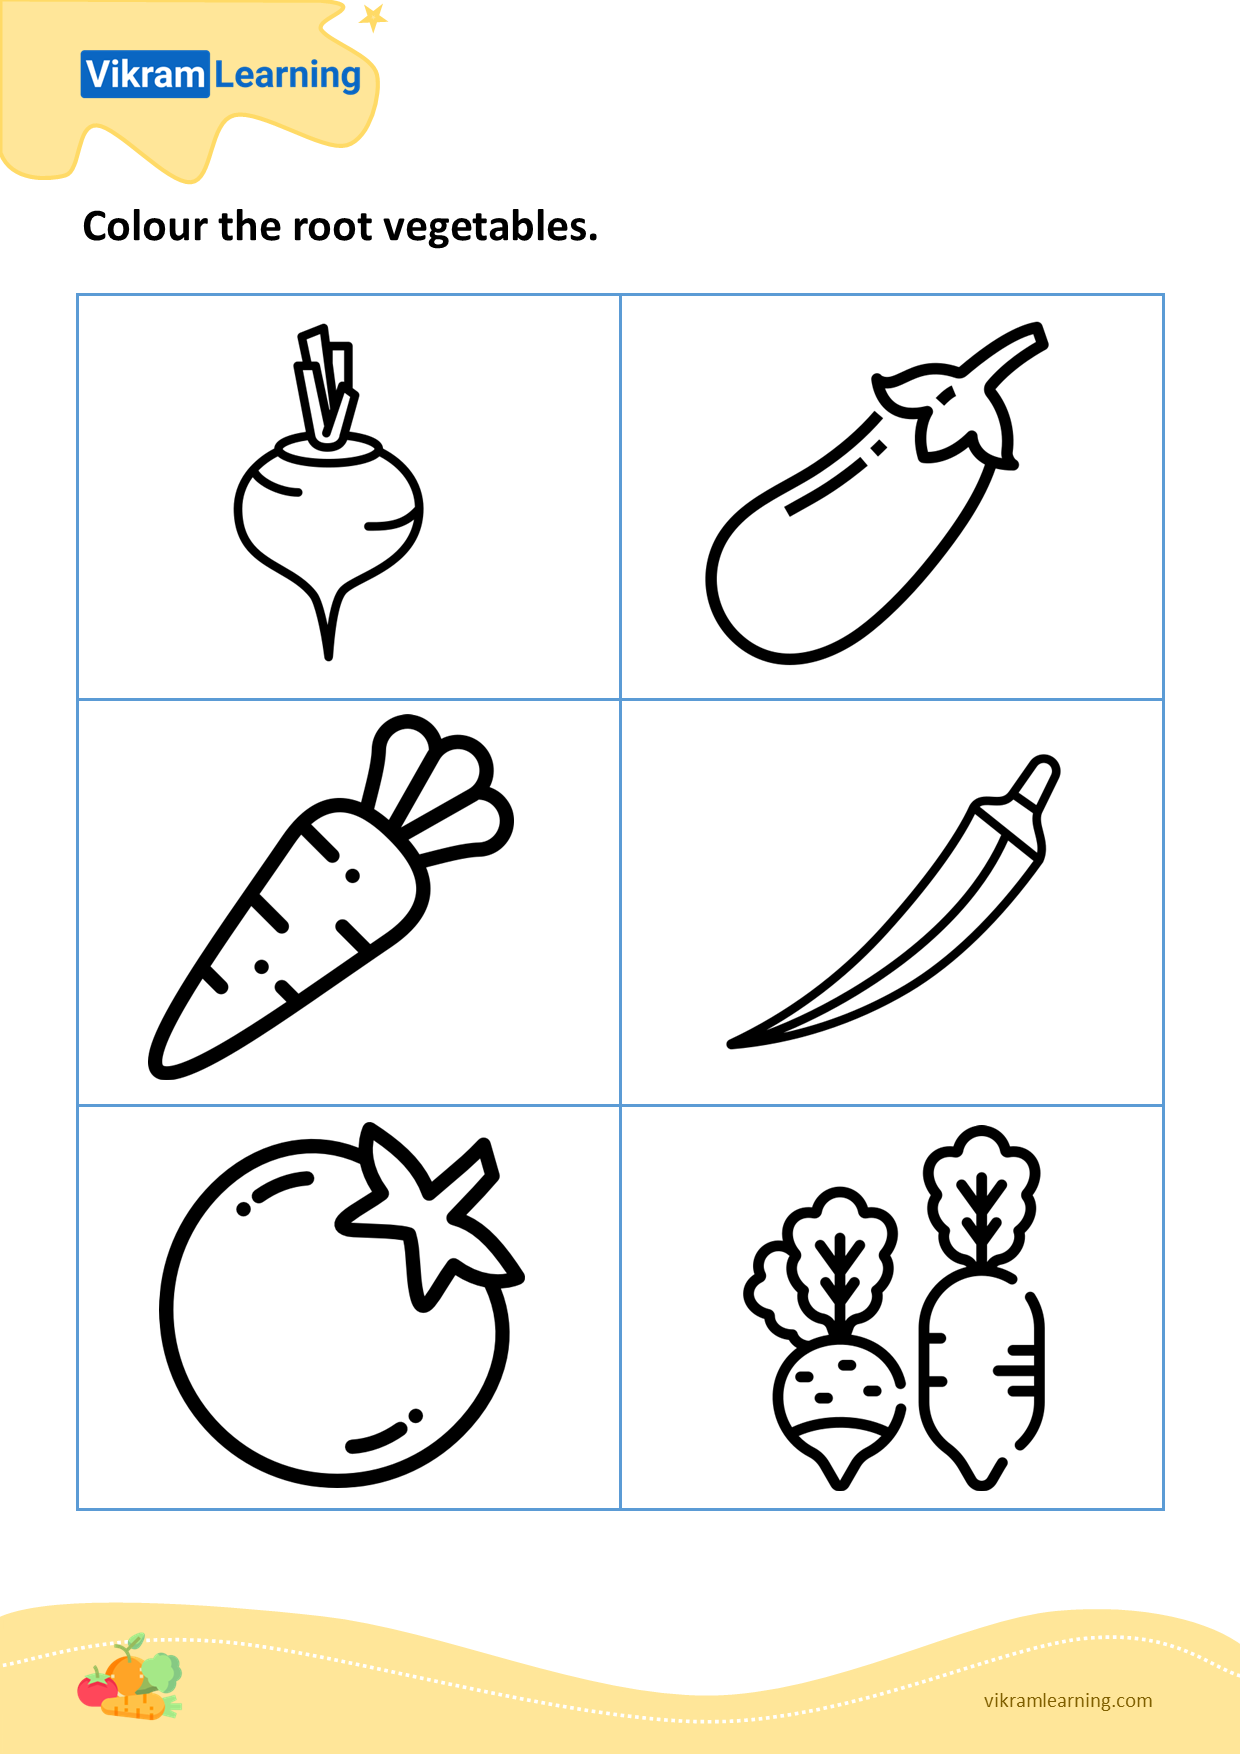 Download colour the root vegetables worksheets